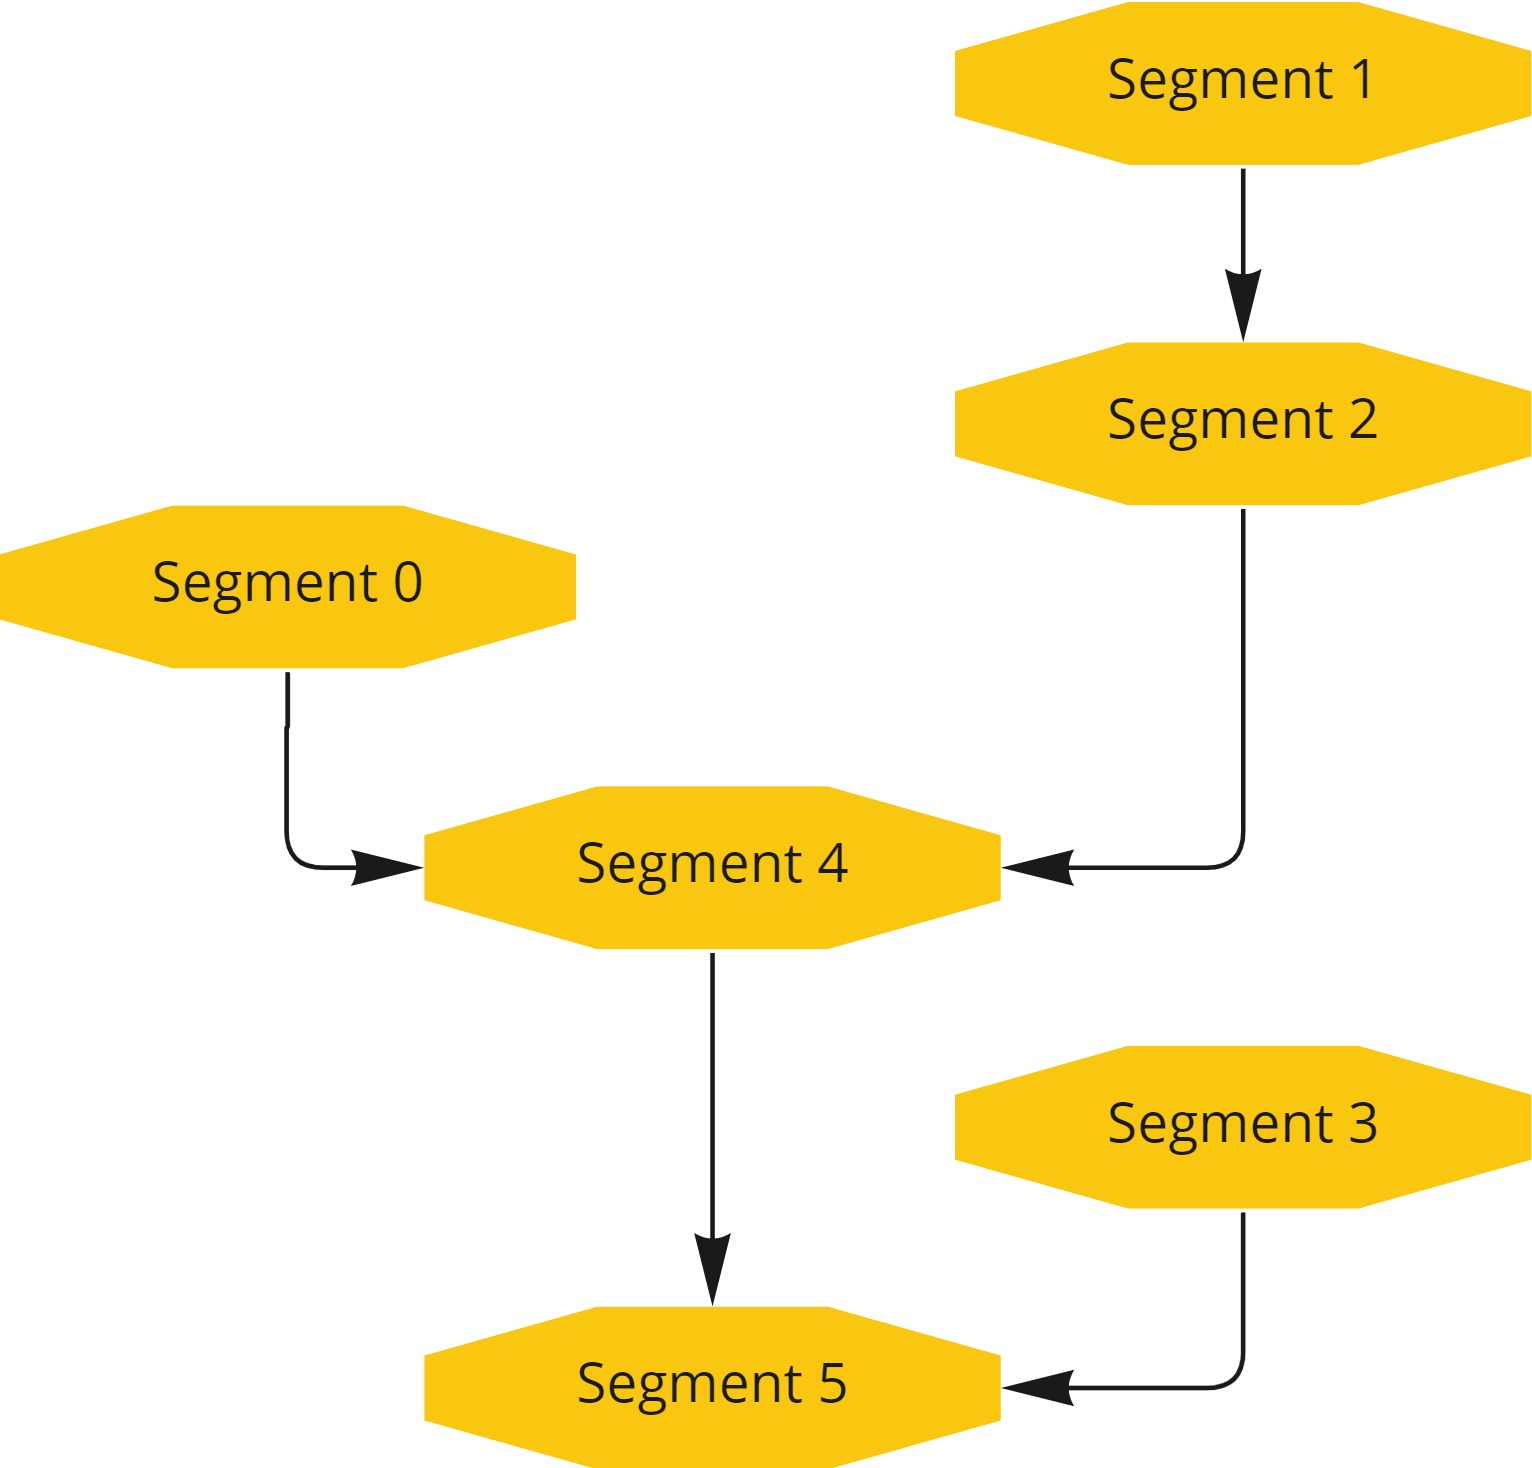 PoCLO Workflow can also be represented by the Segment dependency tree.